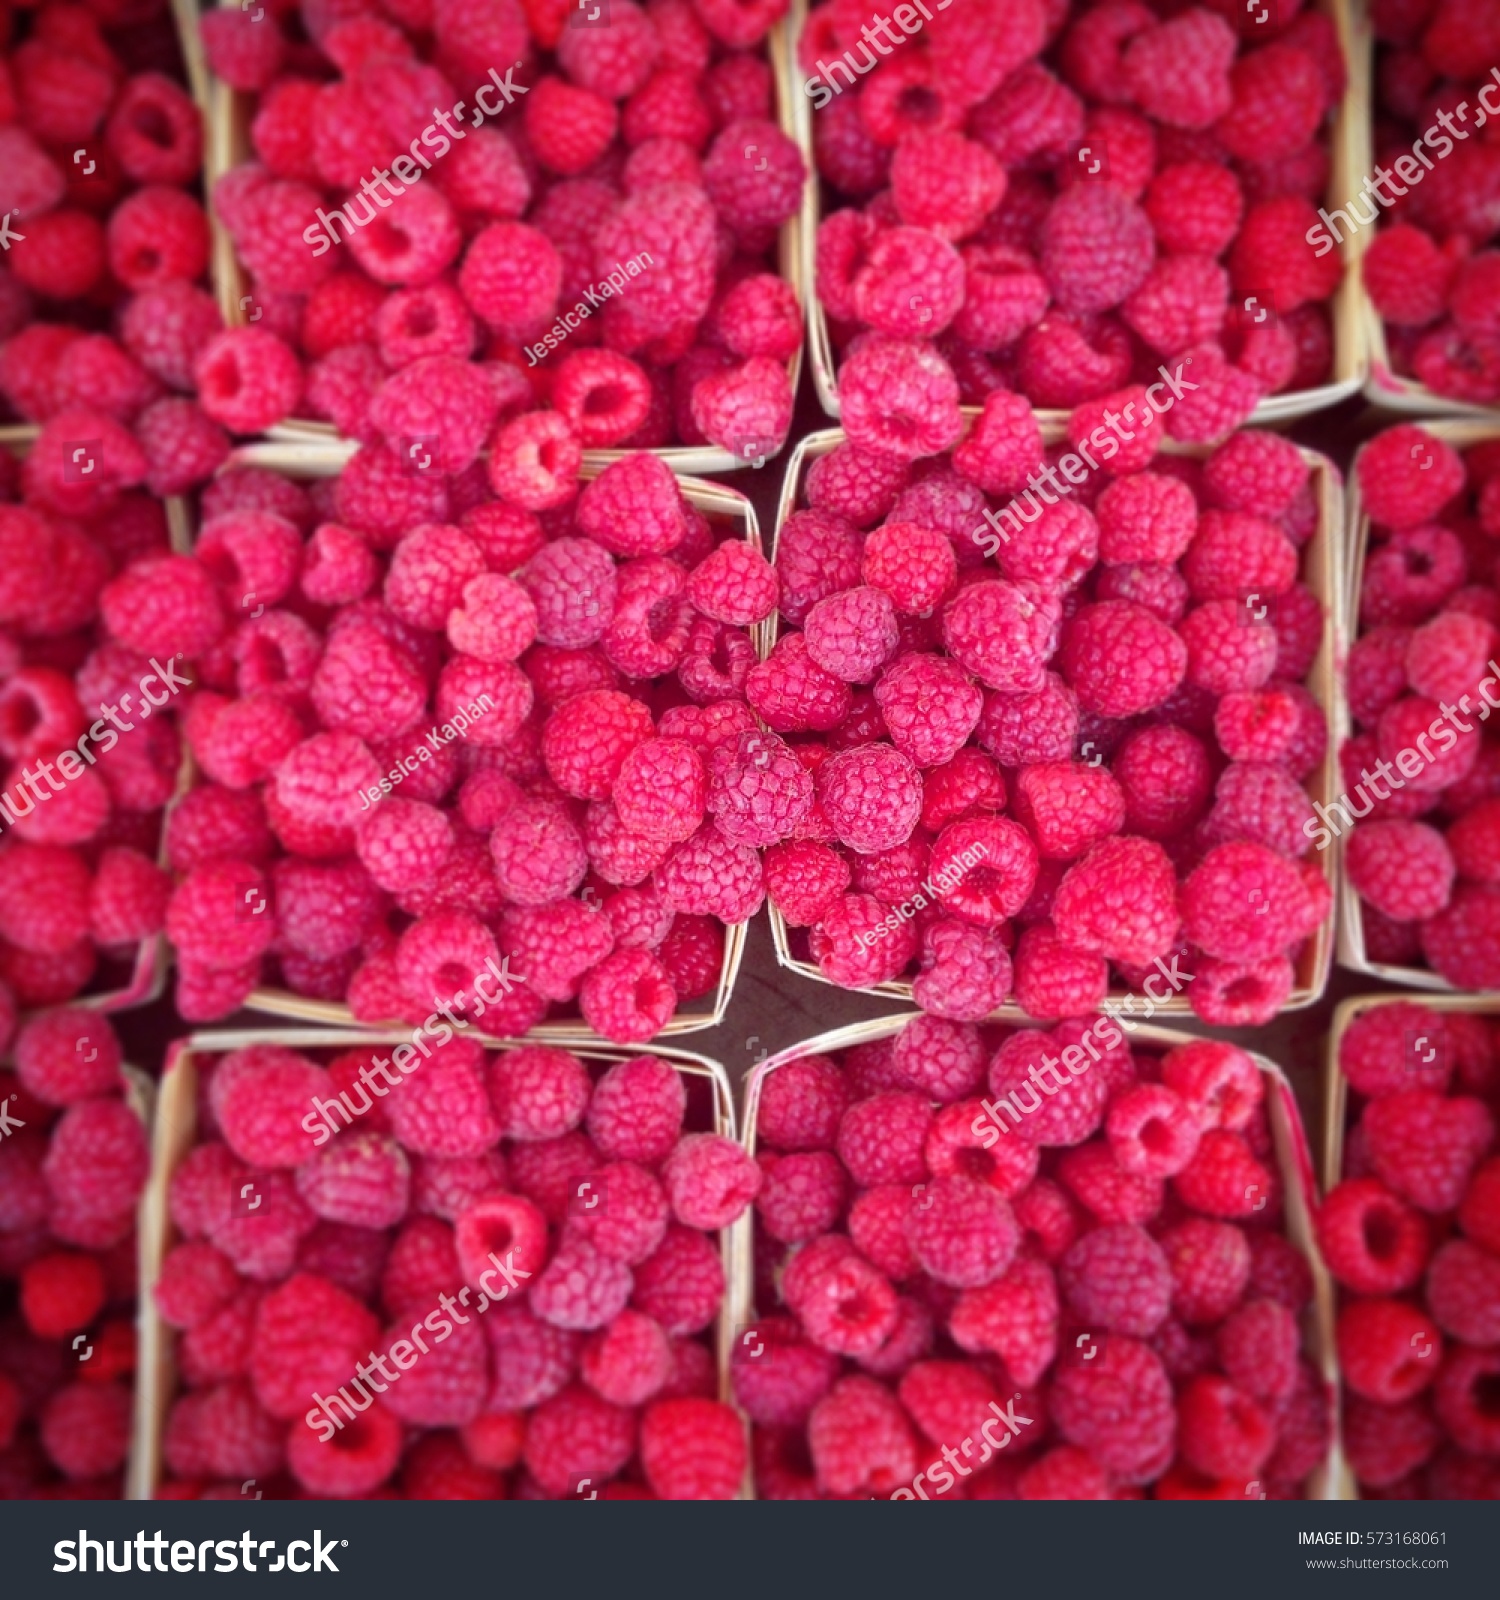 Many Containers Red Ripe Raspberries Sold Stock Photo (Royalty Free ...